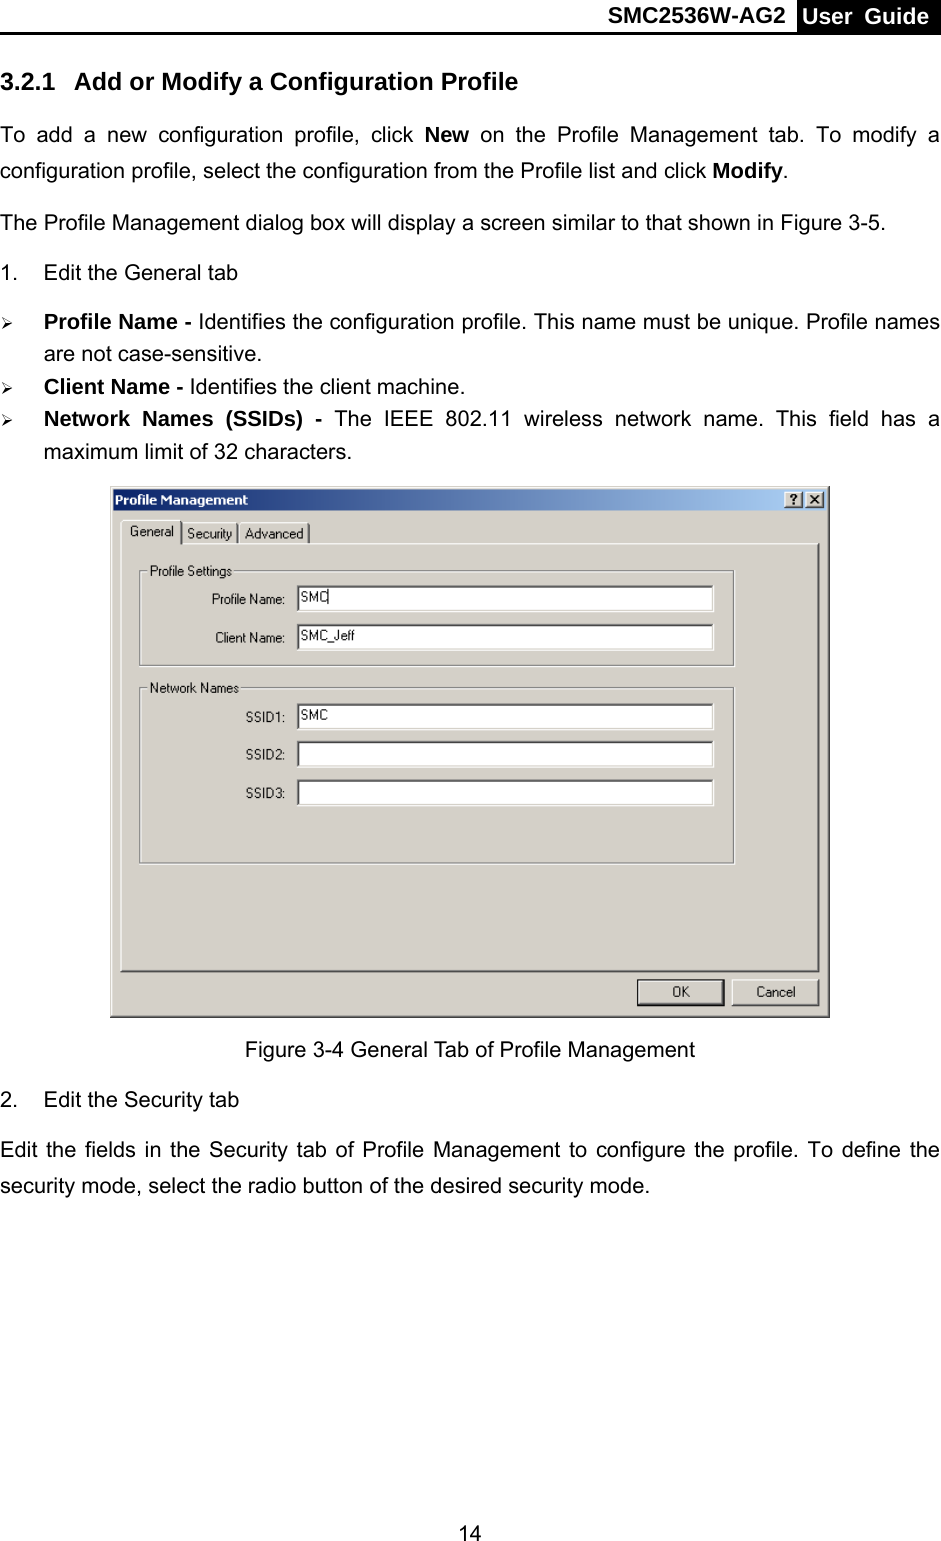 SMC2536W-AG2  User Guide   143.2.1  Add or Modify a Configuration Profile To add a new configuration profile, click New on the Profile Management tab. To modify a configuration profile, select the configuration from the Profile list and click Modify. The Profile Management dialog box will display a screen similar to that shown in Figure 3-5. 1.  Edit the General tab ¾ Profile Name - Identifies the configuration profile. This name must be unique. Profile names are not case-sensitive. ¾ Client Name - Identifies the client machine. ¾ Network Names (SSIDs) - The IEEE 802.11 wireless network name. This field has a maximum limit of 32 characters.  Figure 3-4 General Tab of Profile Management 2.  Edit the Security tab Edit the fields in the Security tab of Profile Management to configure the profile. To define the security mode, select the radio button of the desired security mode.   